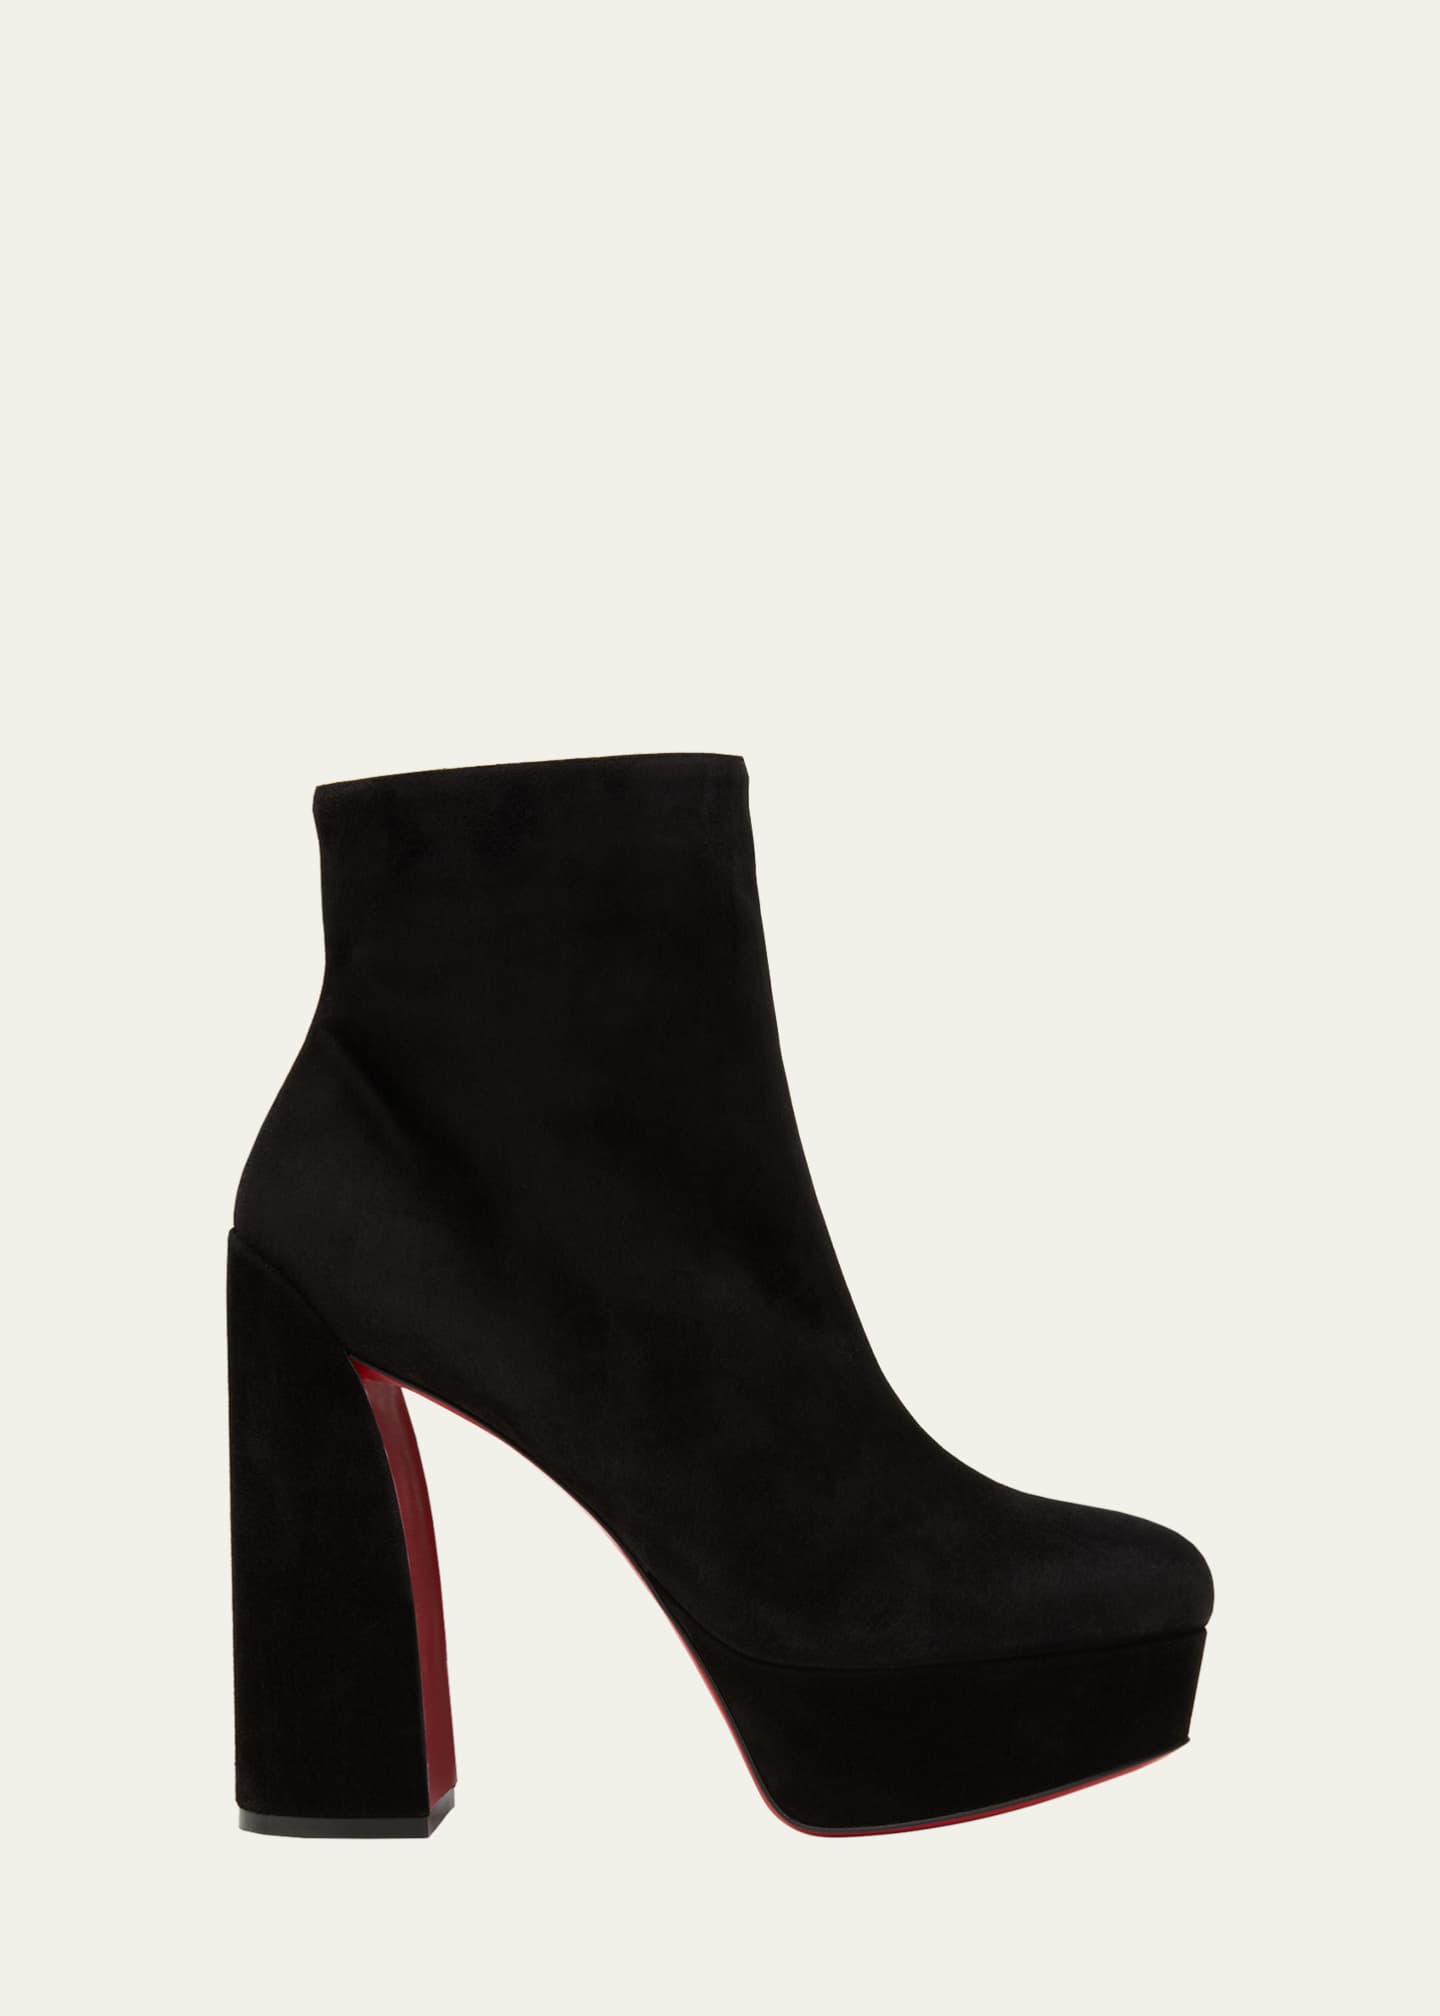 Christian Louboutin PVC Boots – A Daily Diva